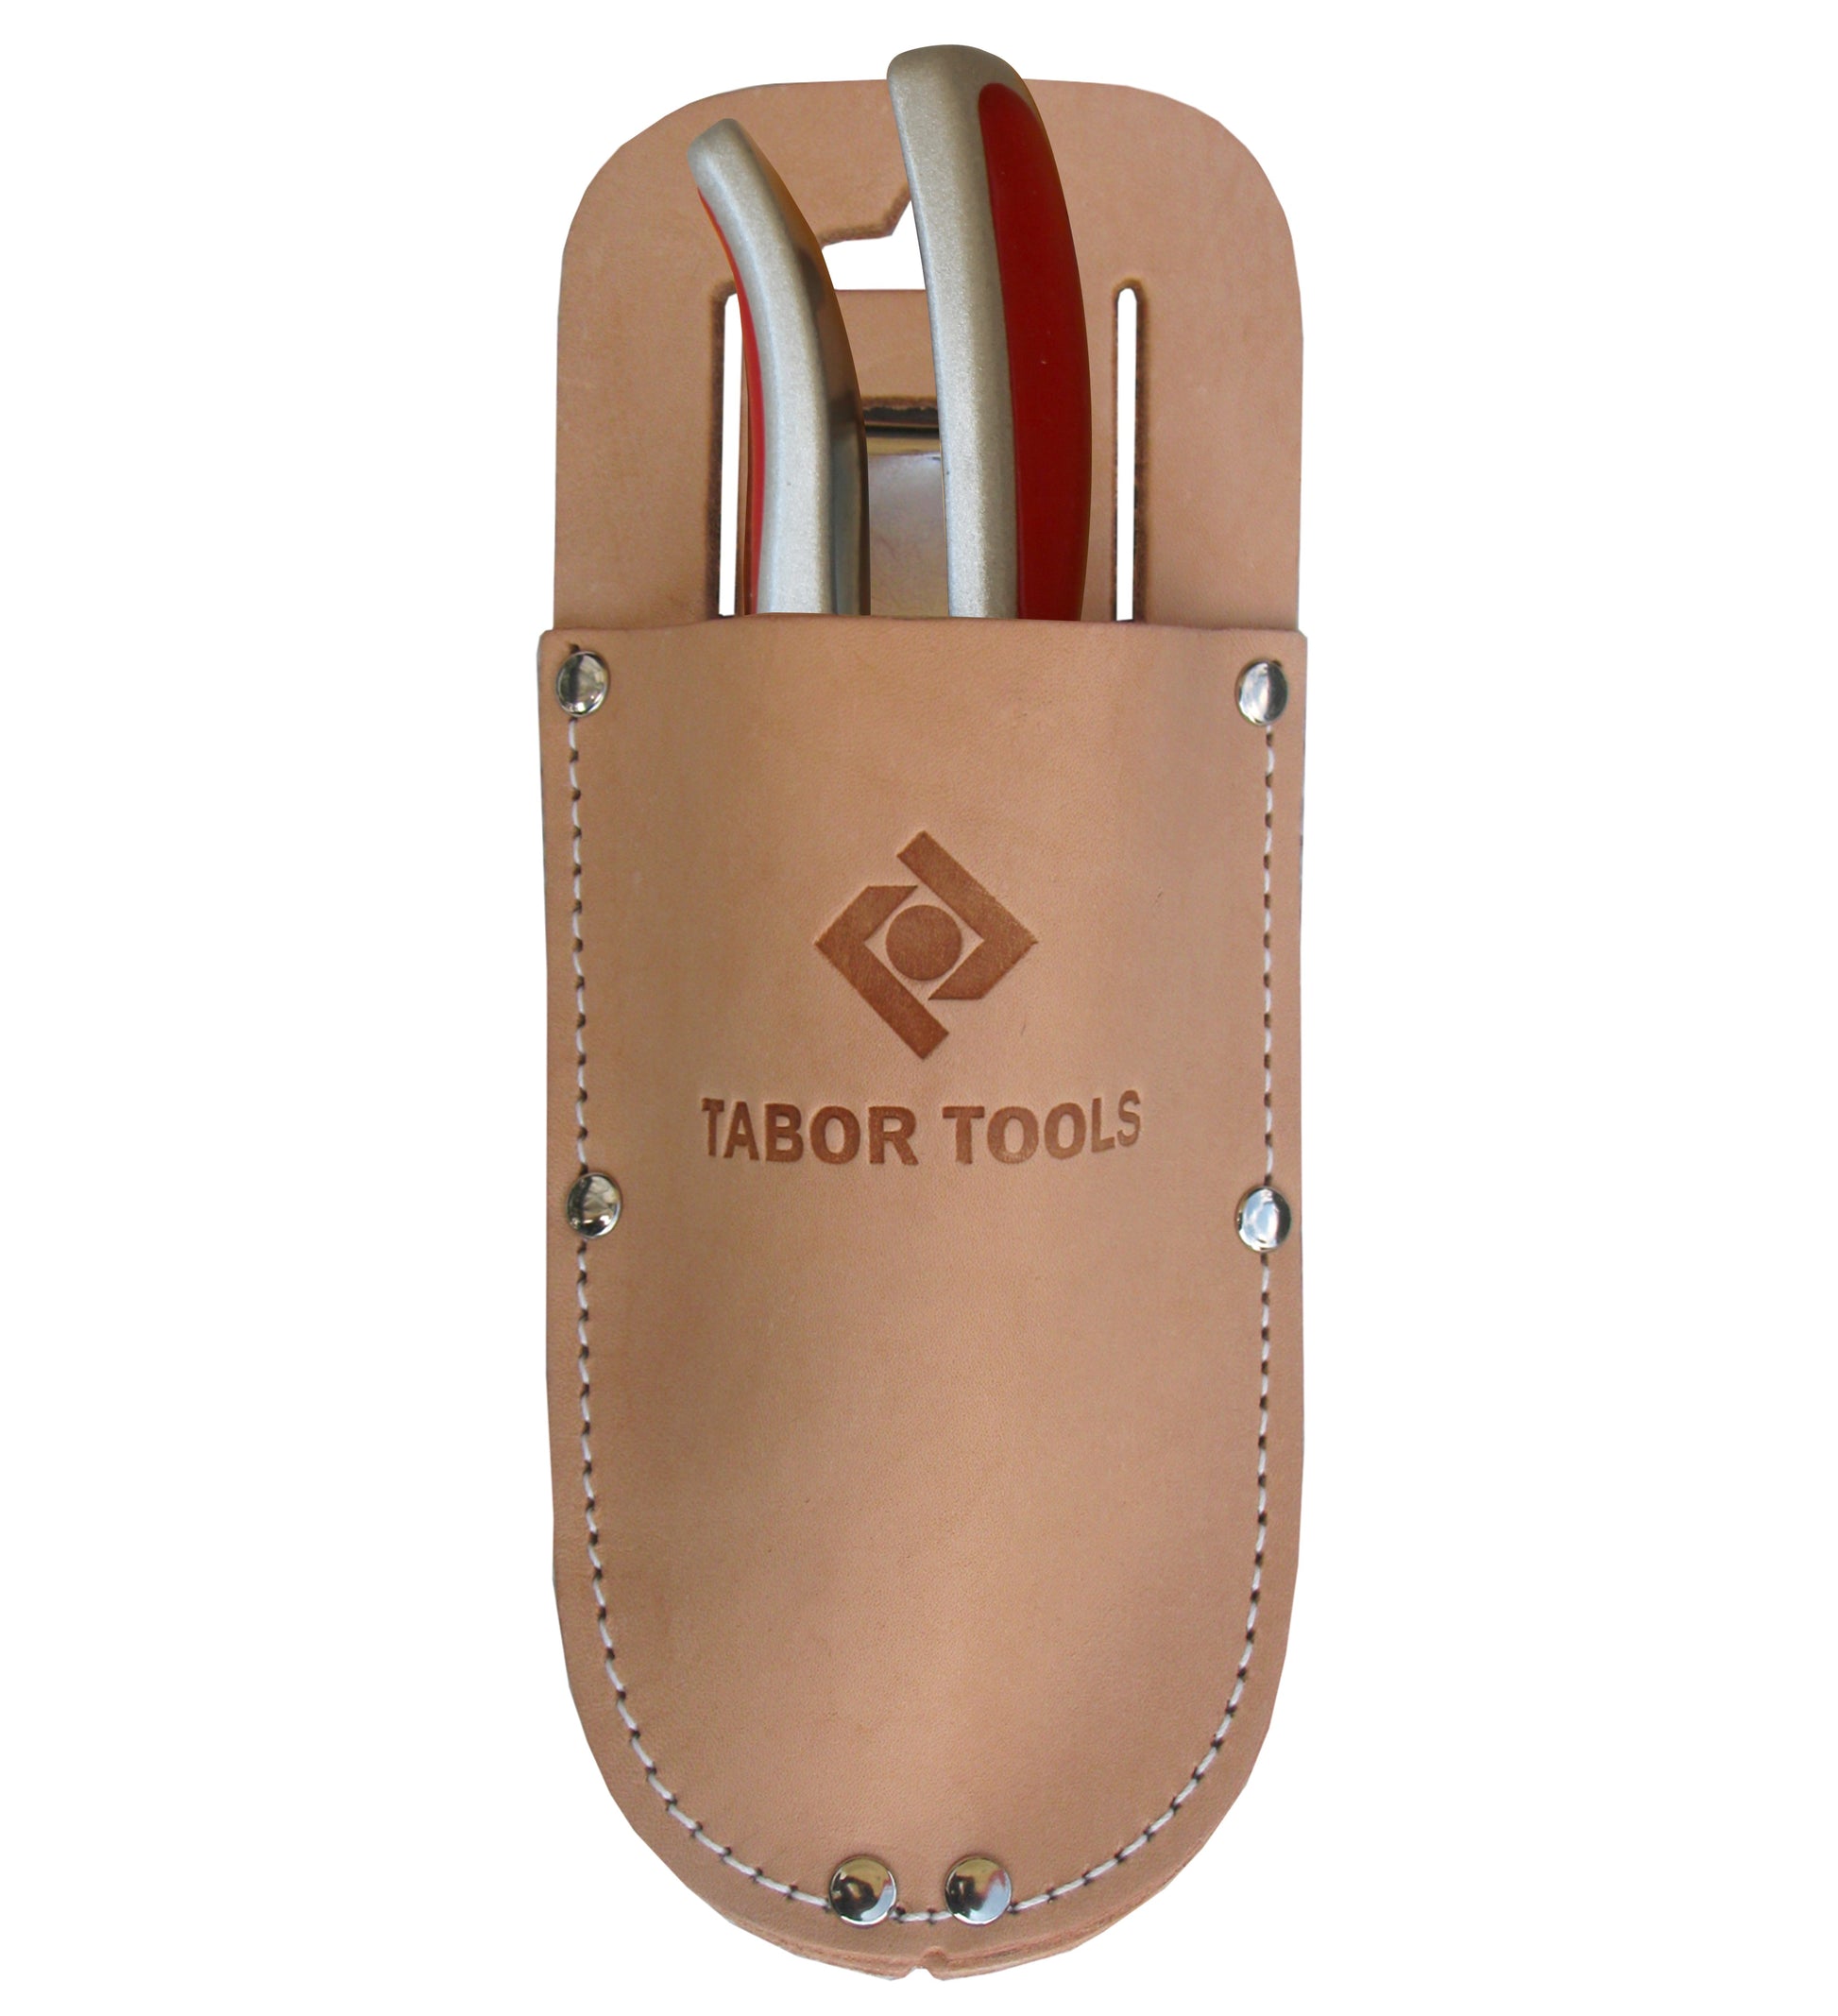 TABOR TOOLS Leather Holster for Pruning Shears. H1. – Tabor Tools